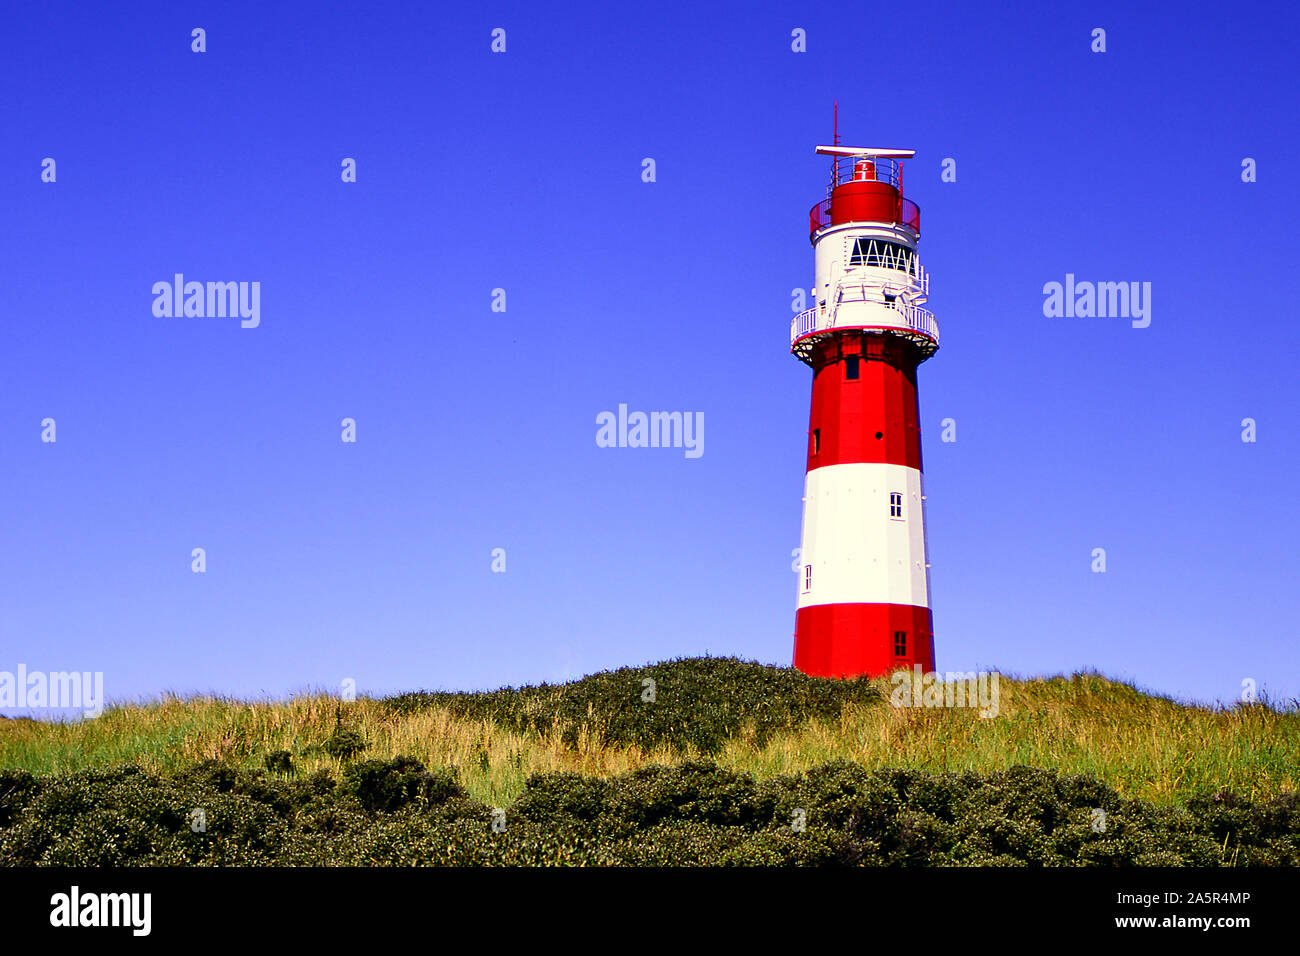 Page 5 - Borkum Germany High Resolution Stock Photography and Images - Alamy